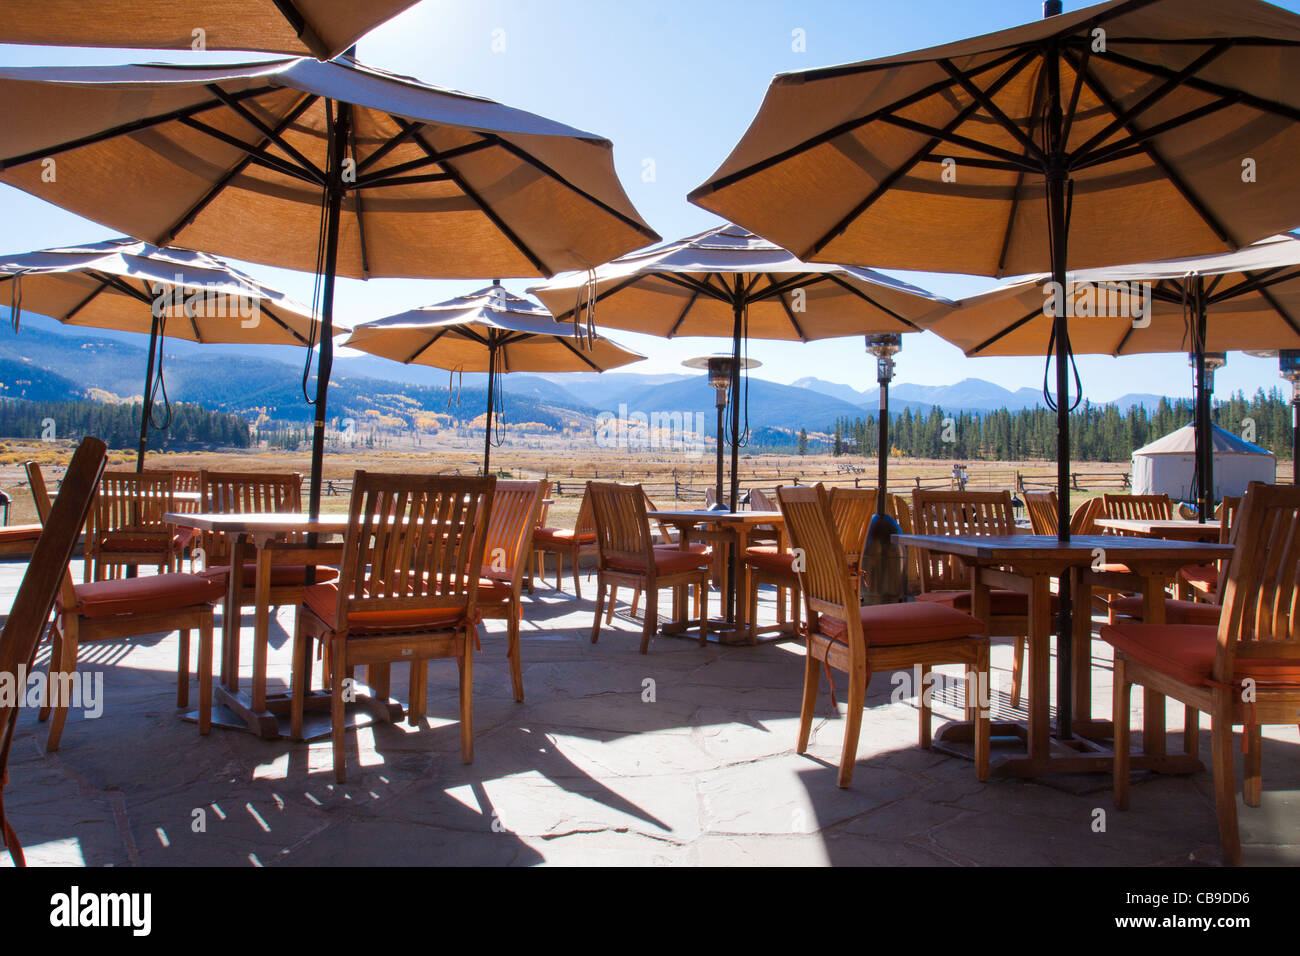 Umbrellas over outdoor patio dining area at a mountain resort lodge with scenic view of mountain range in Colorado Stock Photo